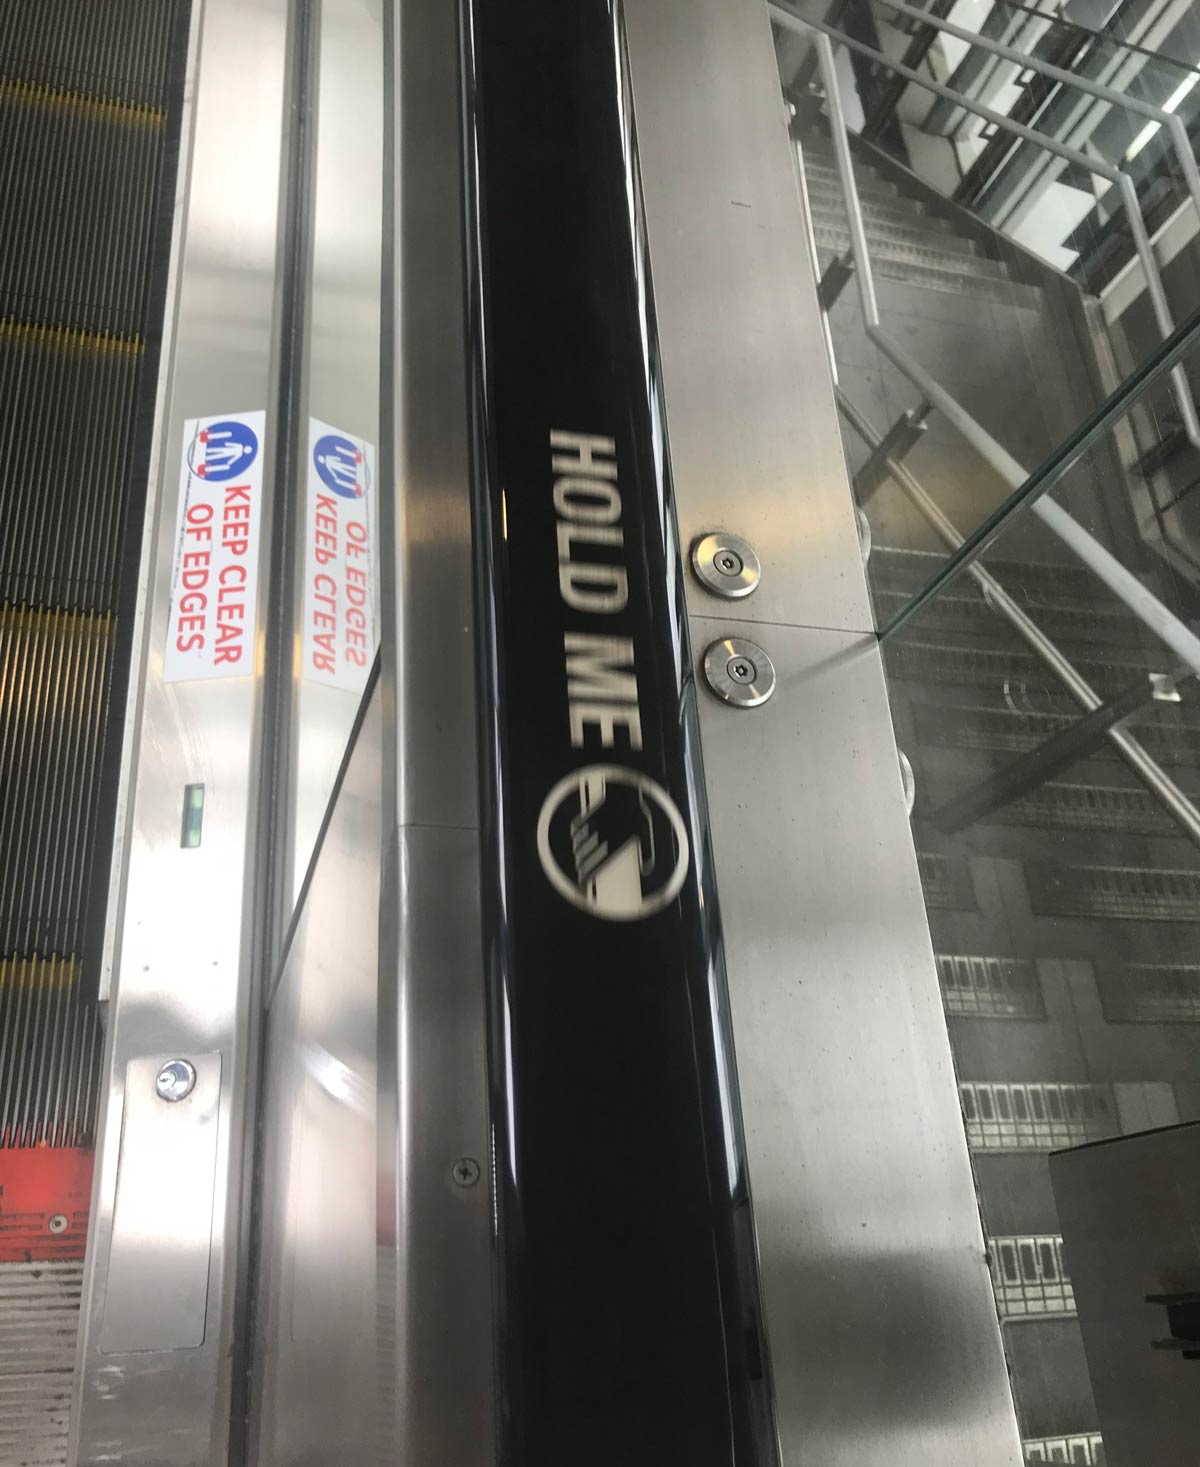 Never before have I so closely identified with an escalator